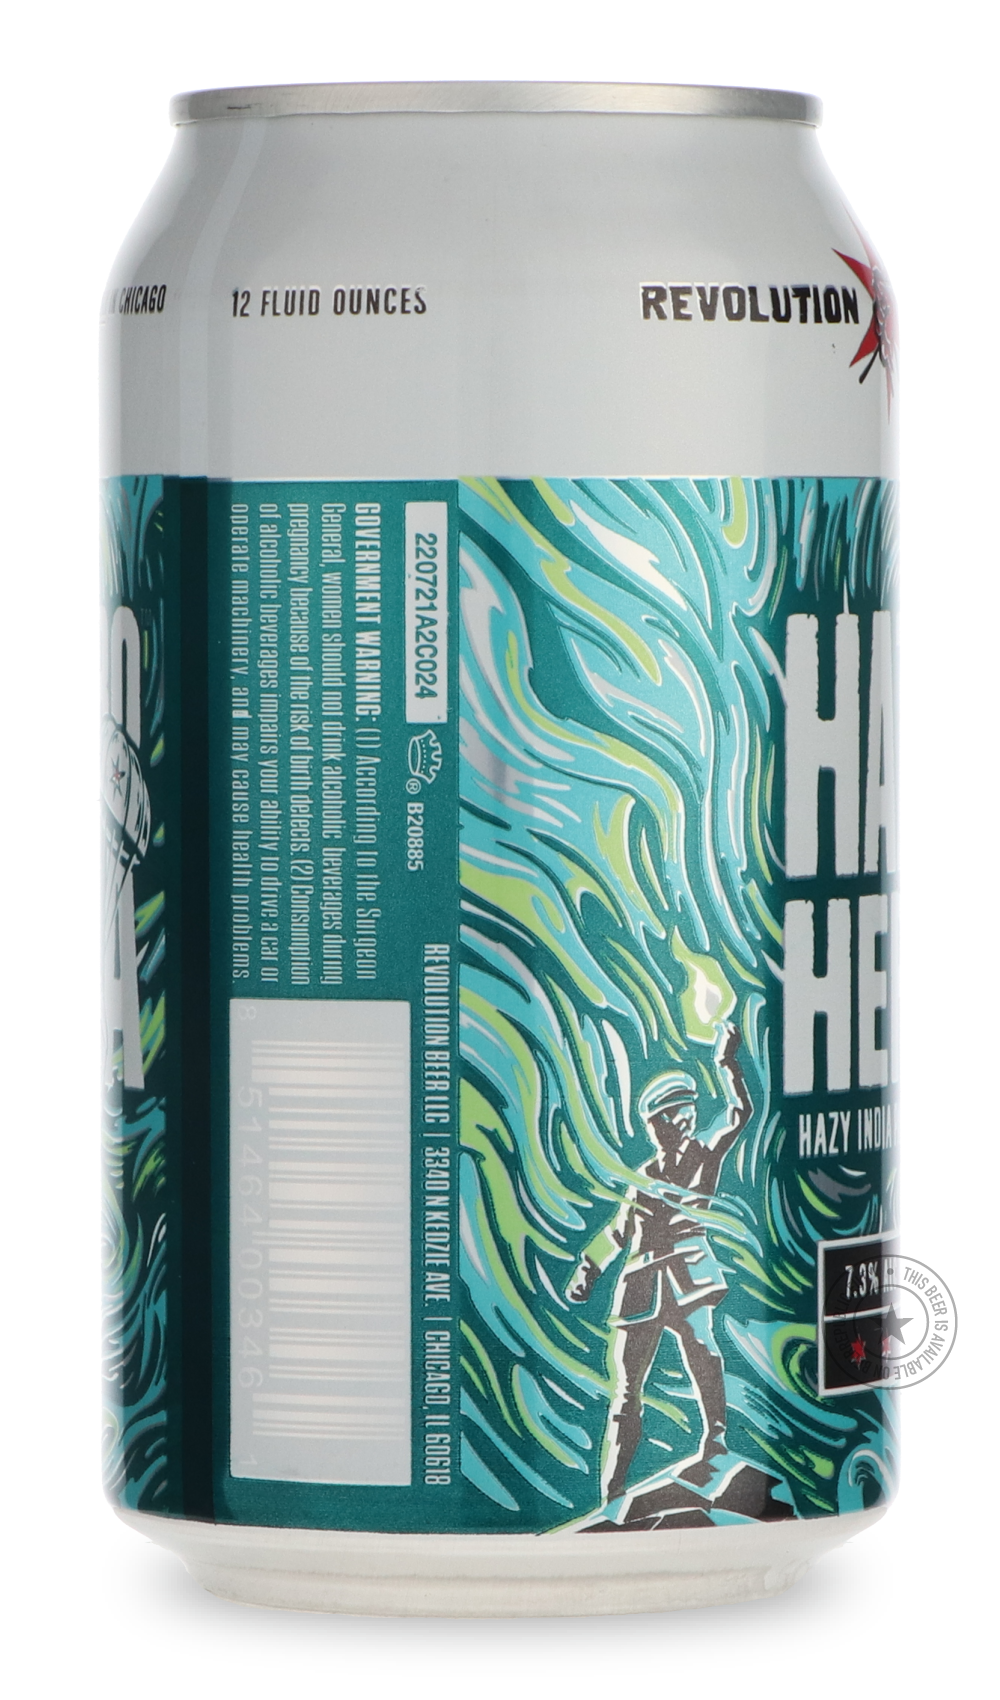 -Revolution- Hazy-Hero-IPA- Only @ Beer Republic - The best online beer store for American & Canadian craft beer - Buy beer online from the USA and Canada - Bier online kopen - Amerikaans bier kopen - Craft beer store - Craft beer kopen - Amerikanisch bier kaufen - Bier online kaufen - Acheter biere online - IPA - Stout - Porter - New England IPA - Hazy IPA - Imperial Stout - Barrel Aged - Barrel Aged Imperial Stout - Brown - Dark beer - Blond - Blonde - Pilsner - Lager - Wheat - Weizen - Amber - Barley Win